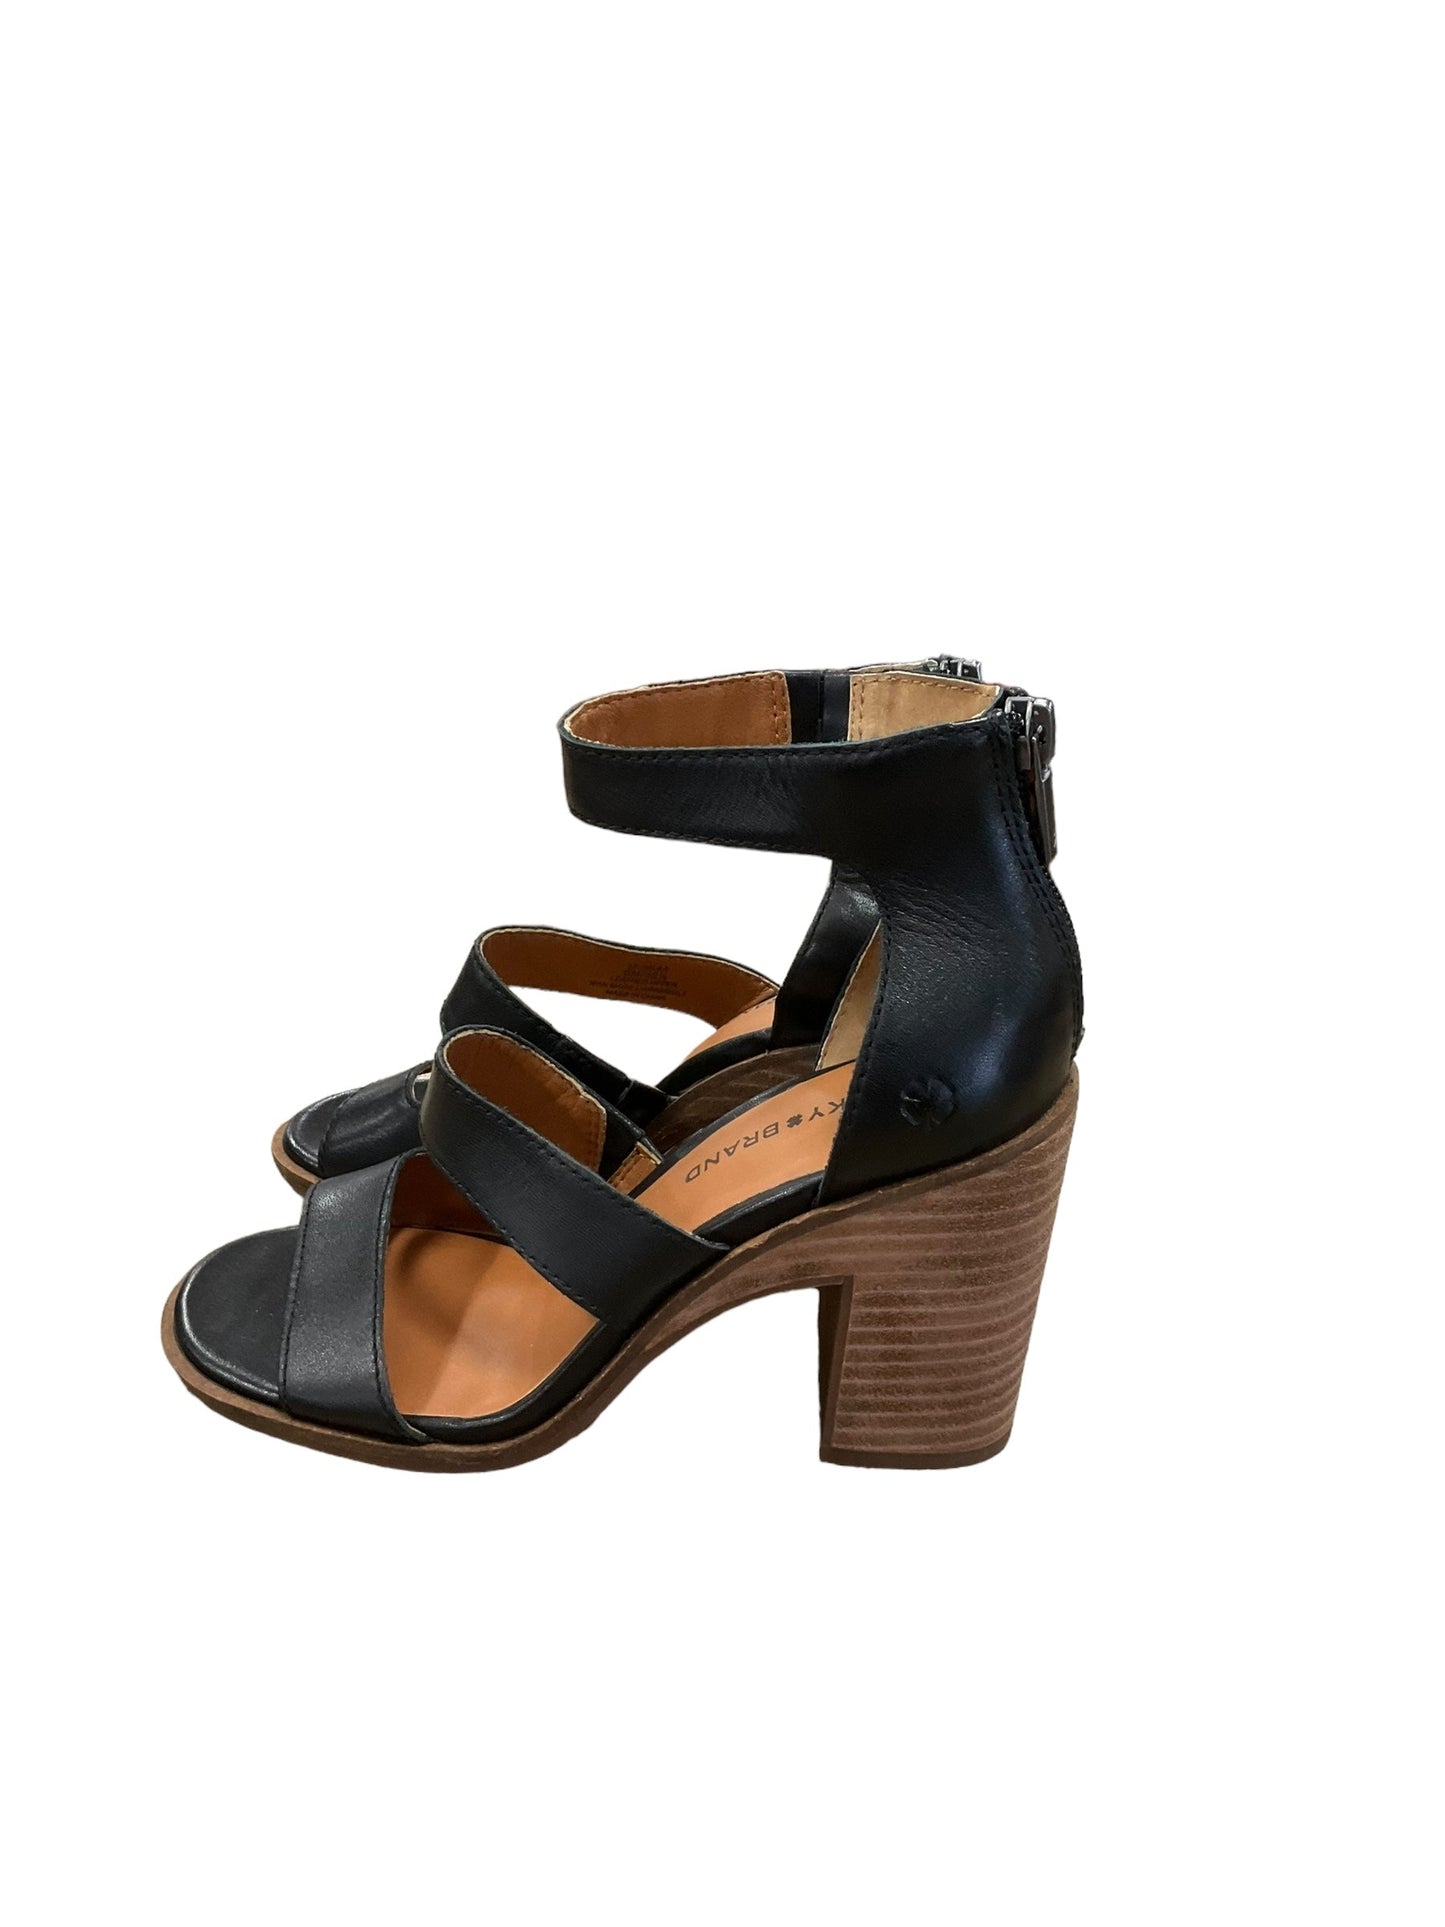 Sandals Heels Block By Lucky Brand  Size: 6